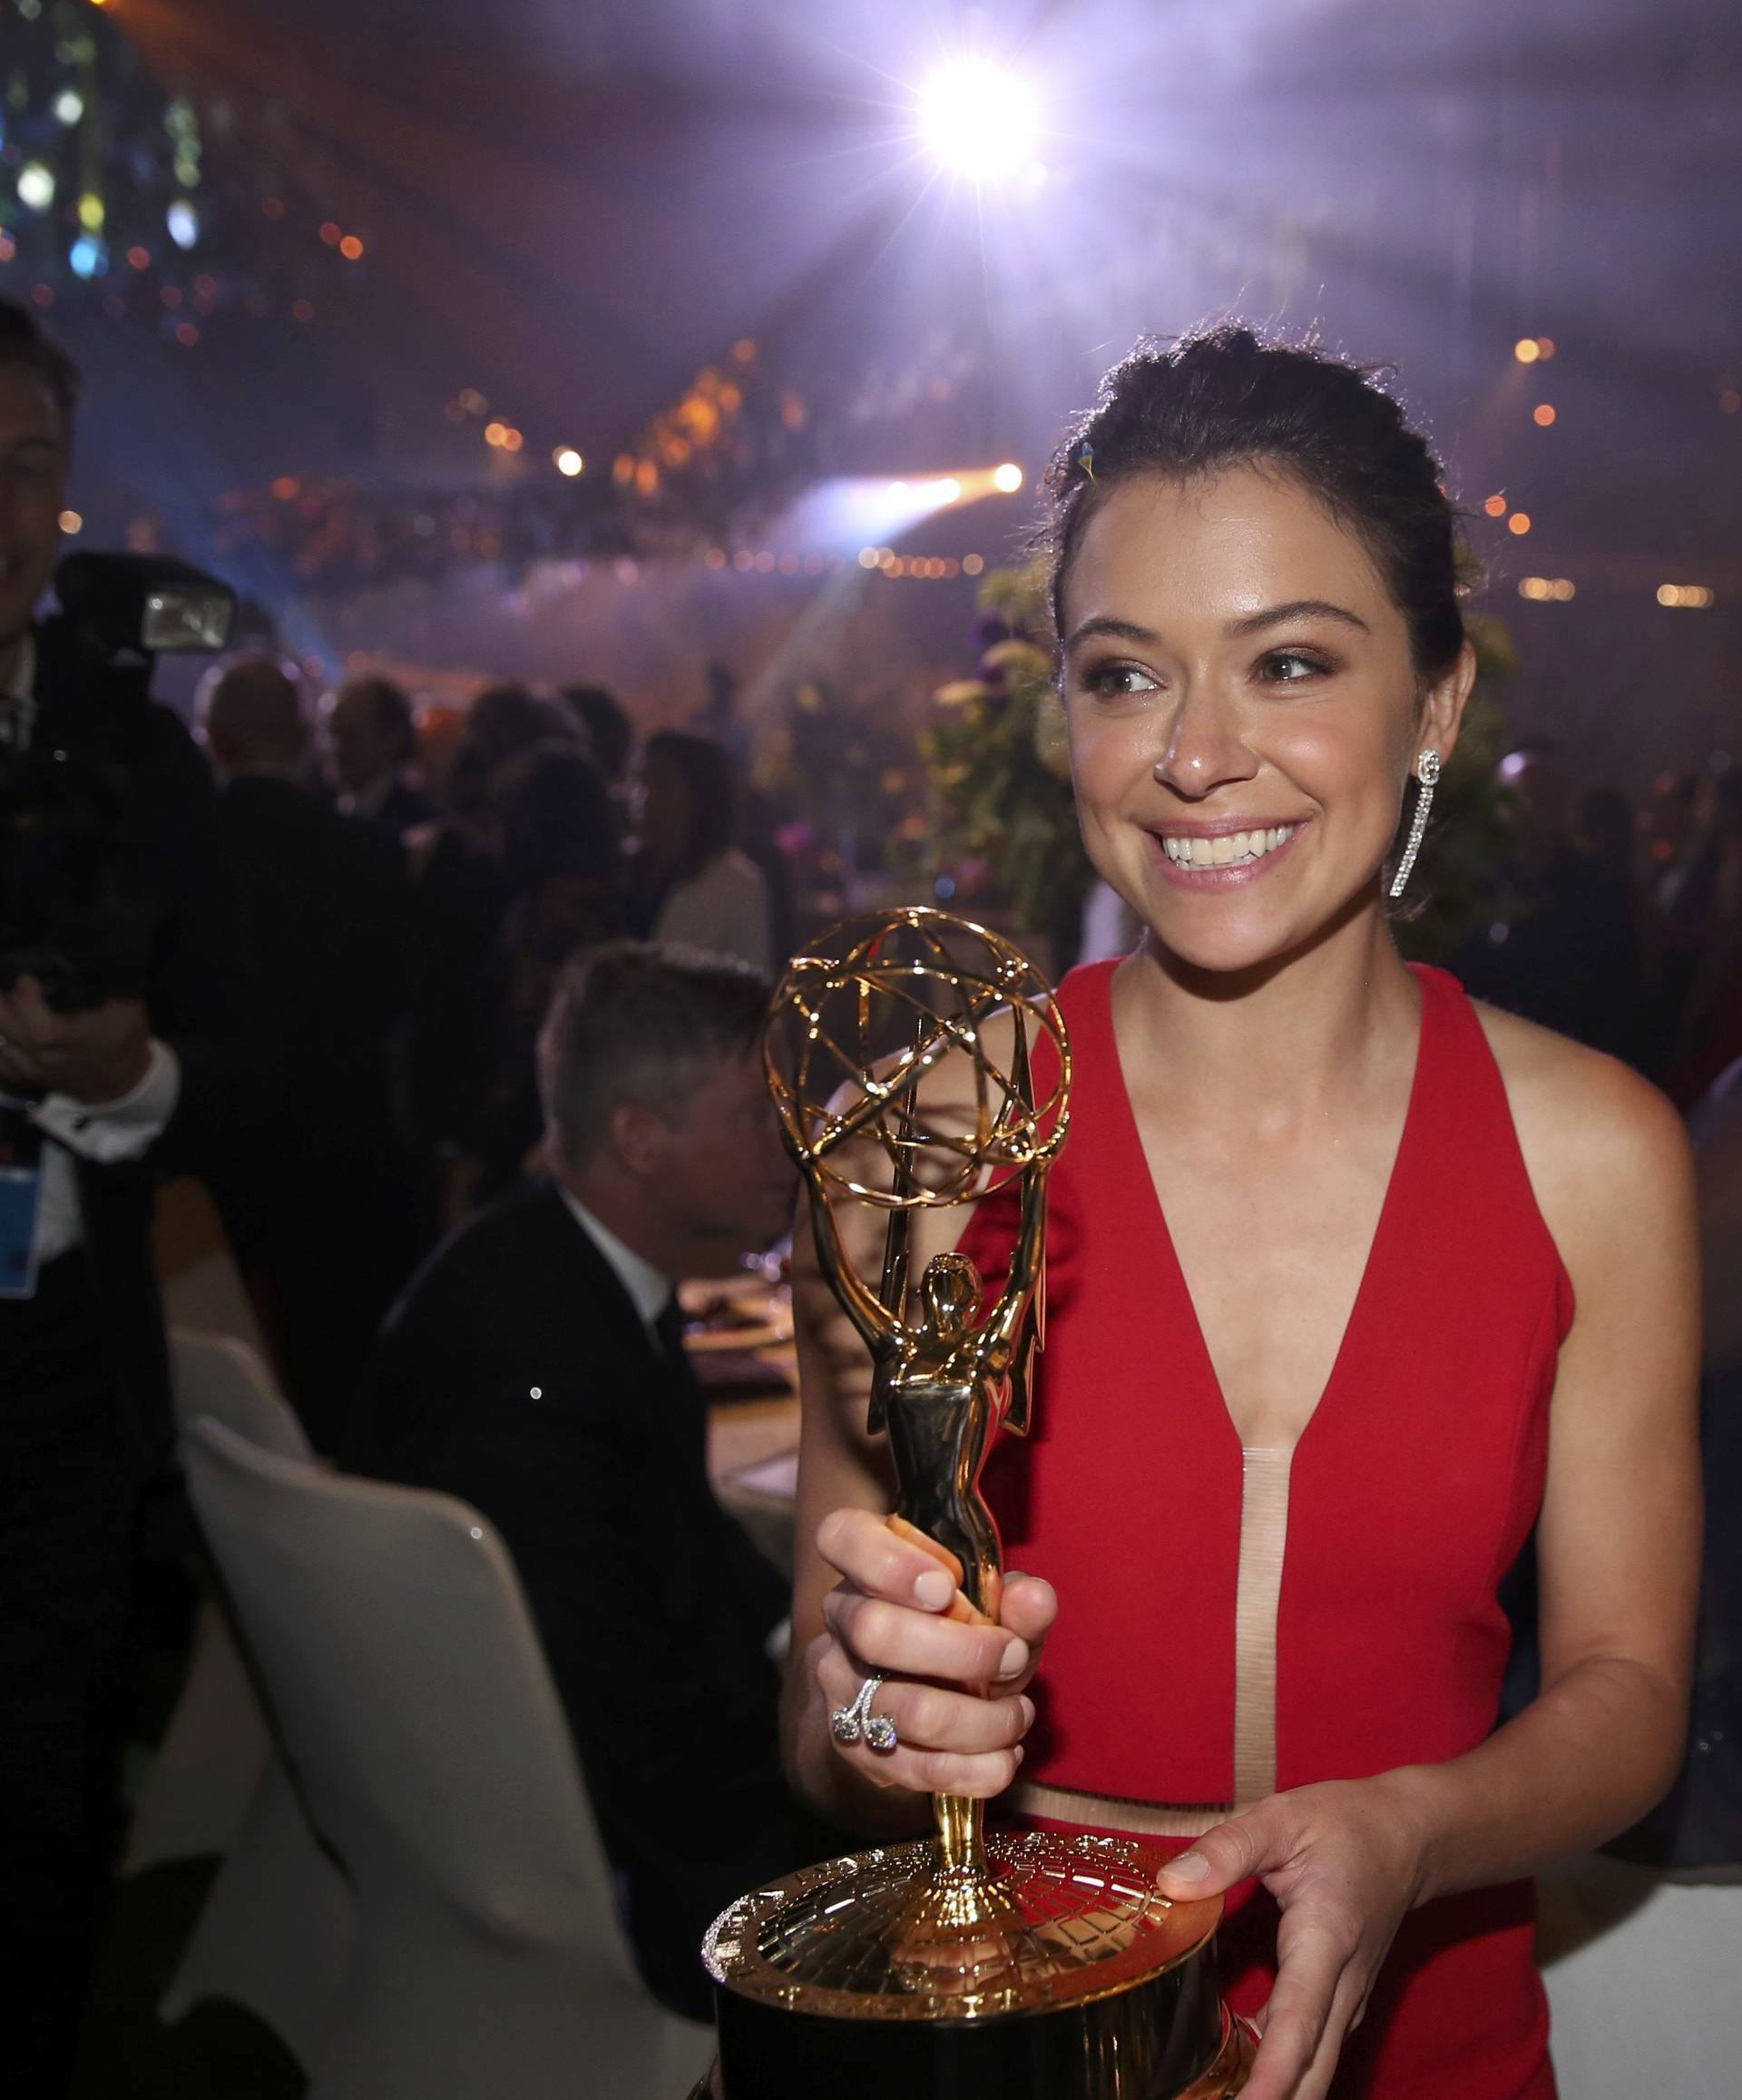 Actress Tatiana Maslany holds her award for Outstanding Lead Actress In A Drama Series as she mingles at the Governors Ball after the 68th Primetime Emmy Awards in Los Angeles